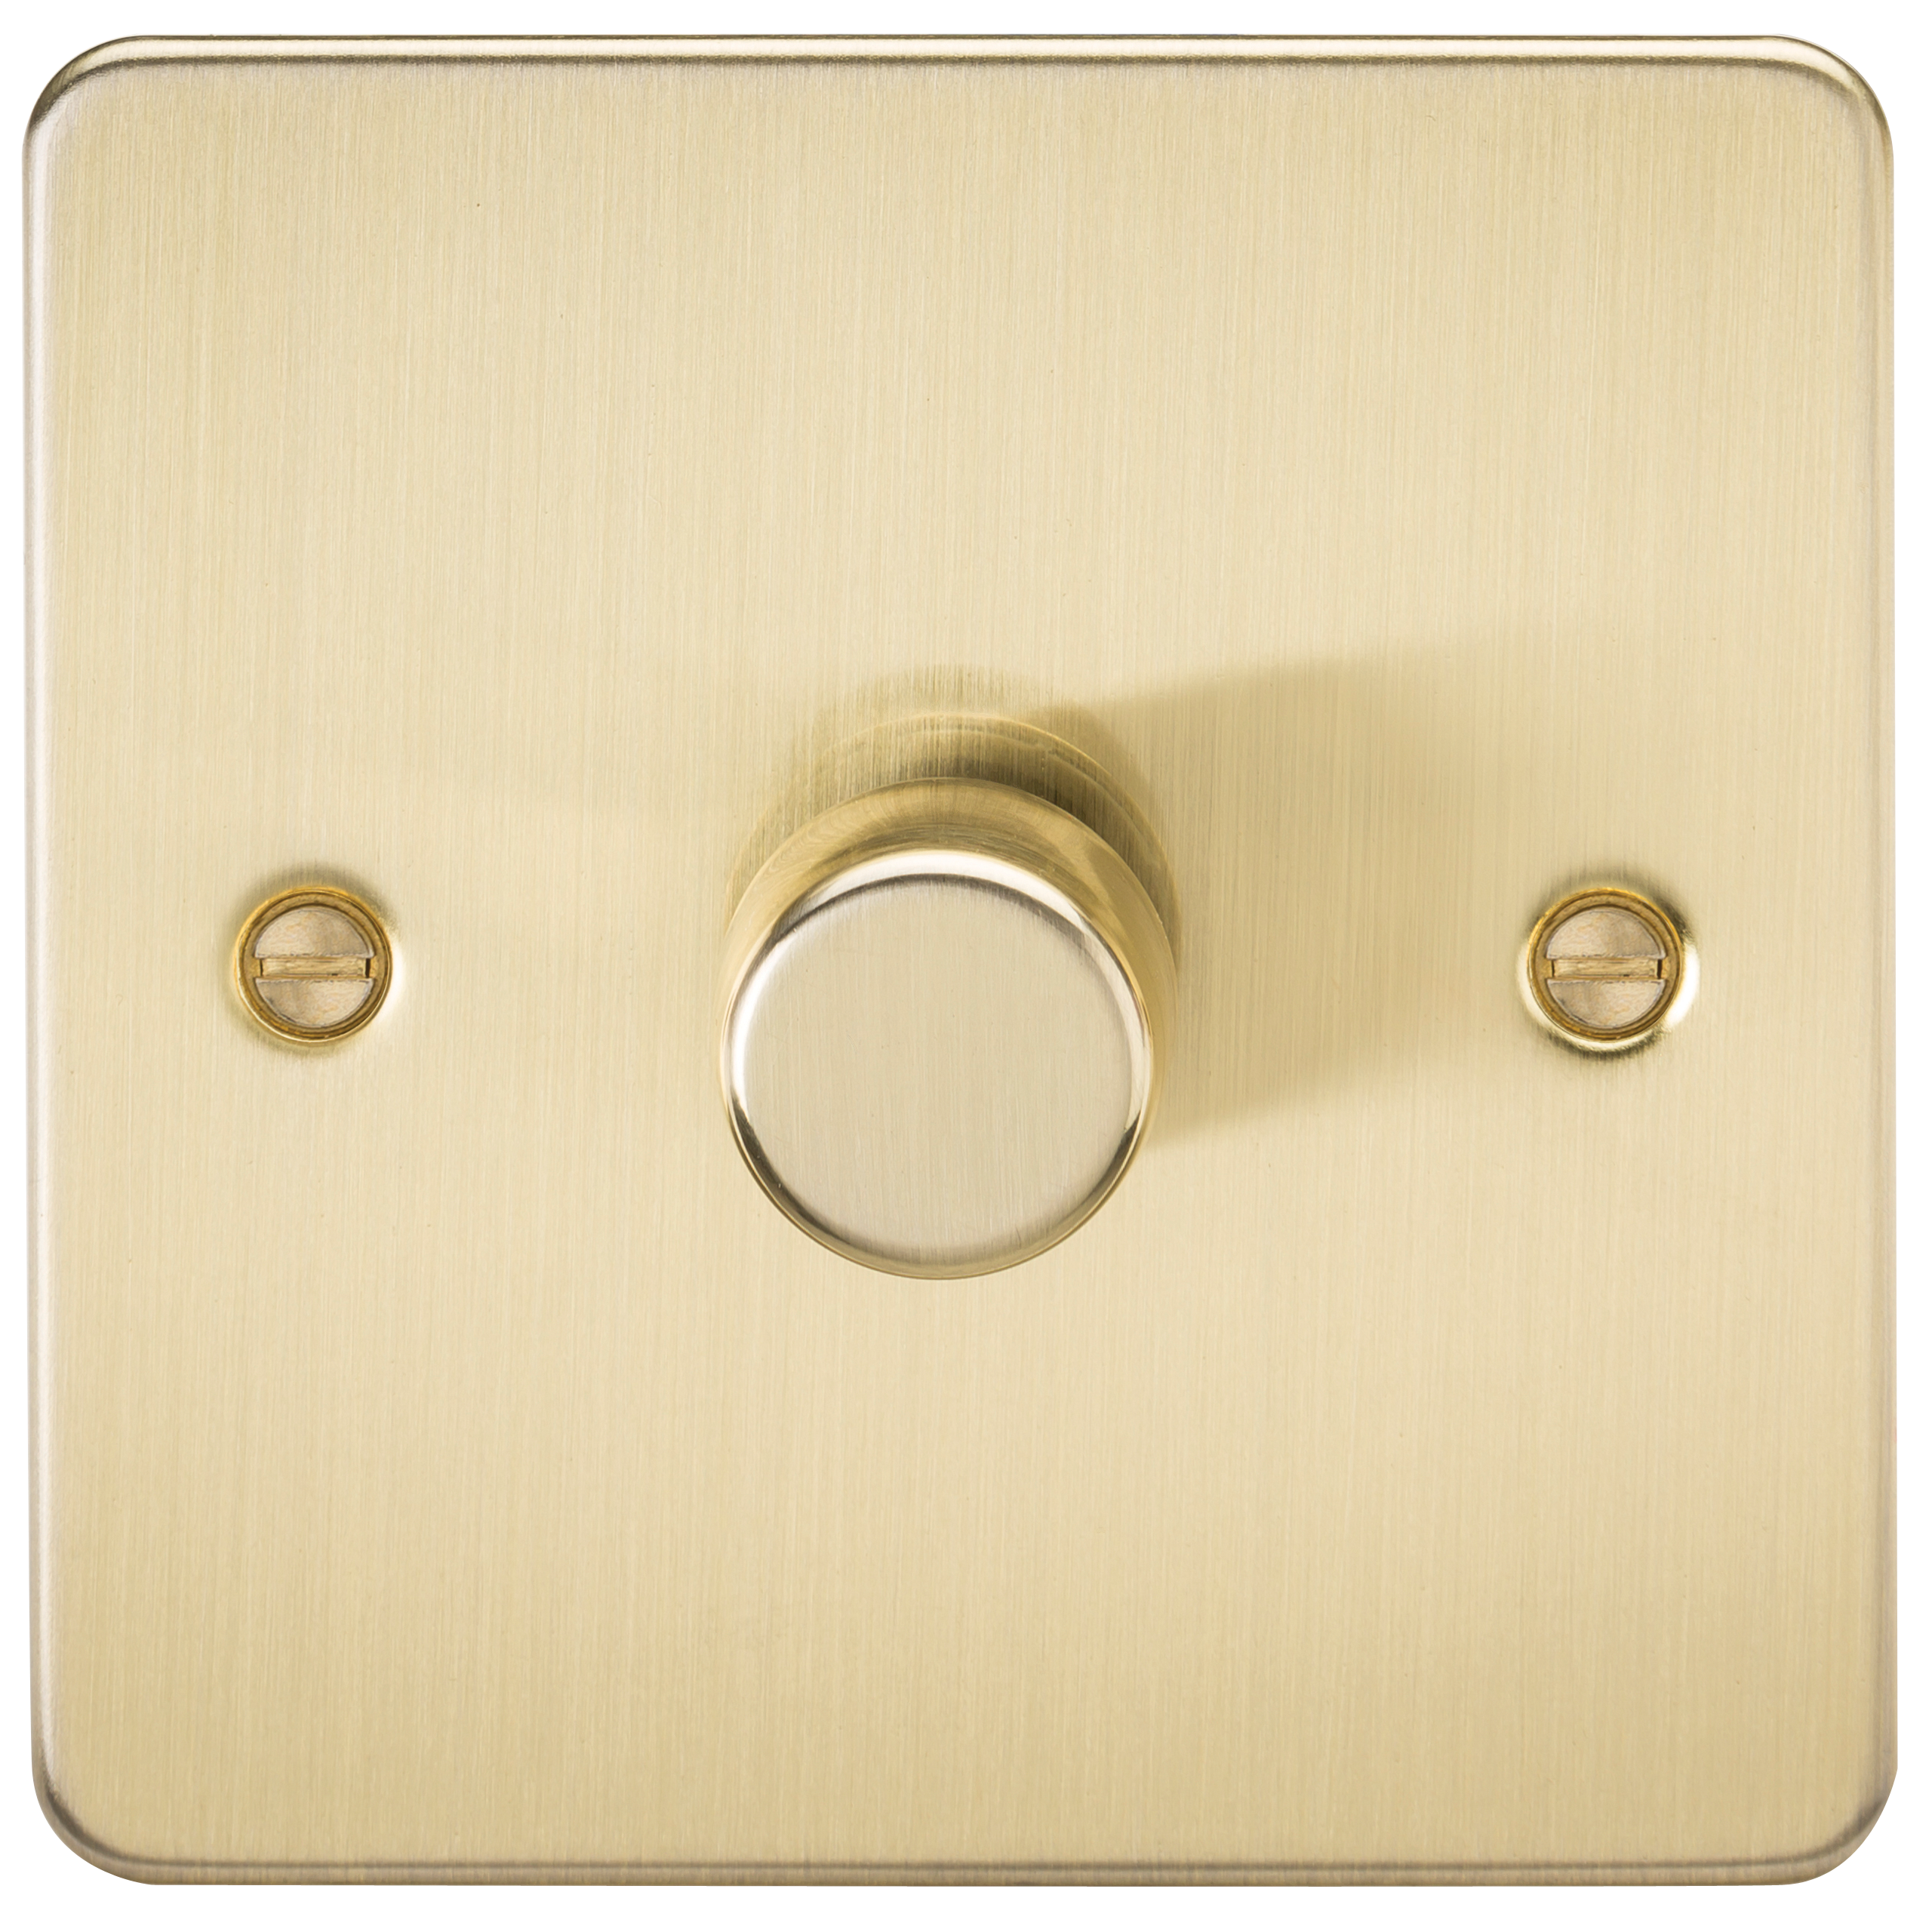 Flat Plate 1G 2 Way 10-200W Dimmer - Brushed Brass - FP2181BB 